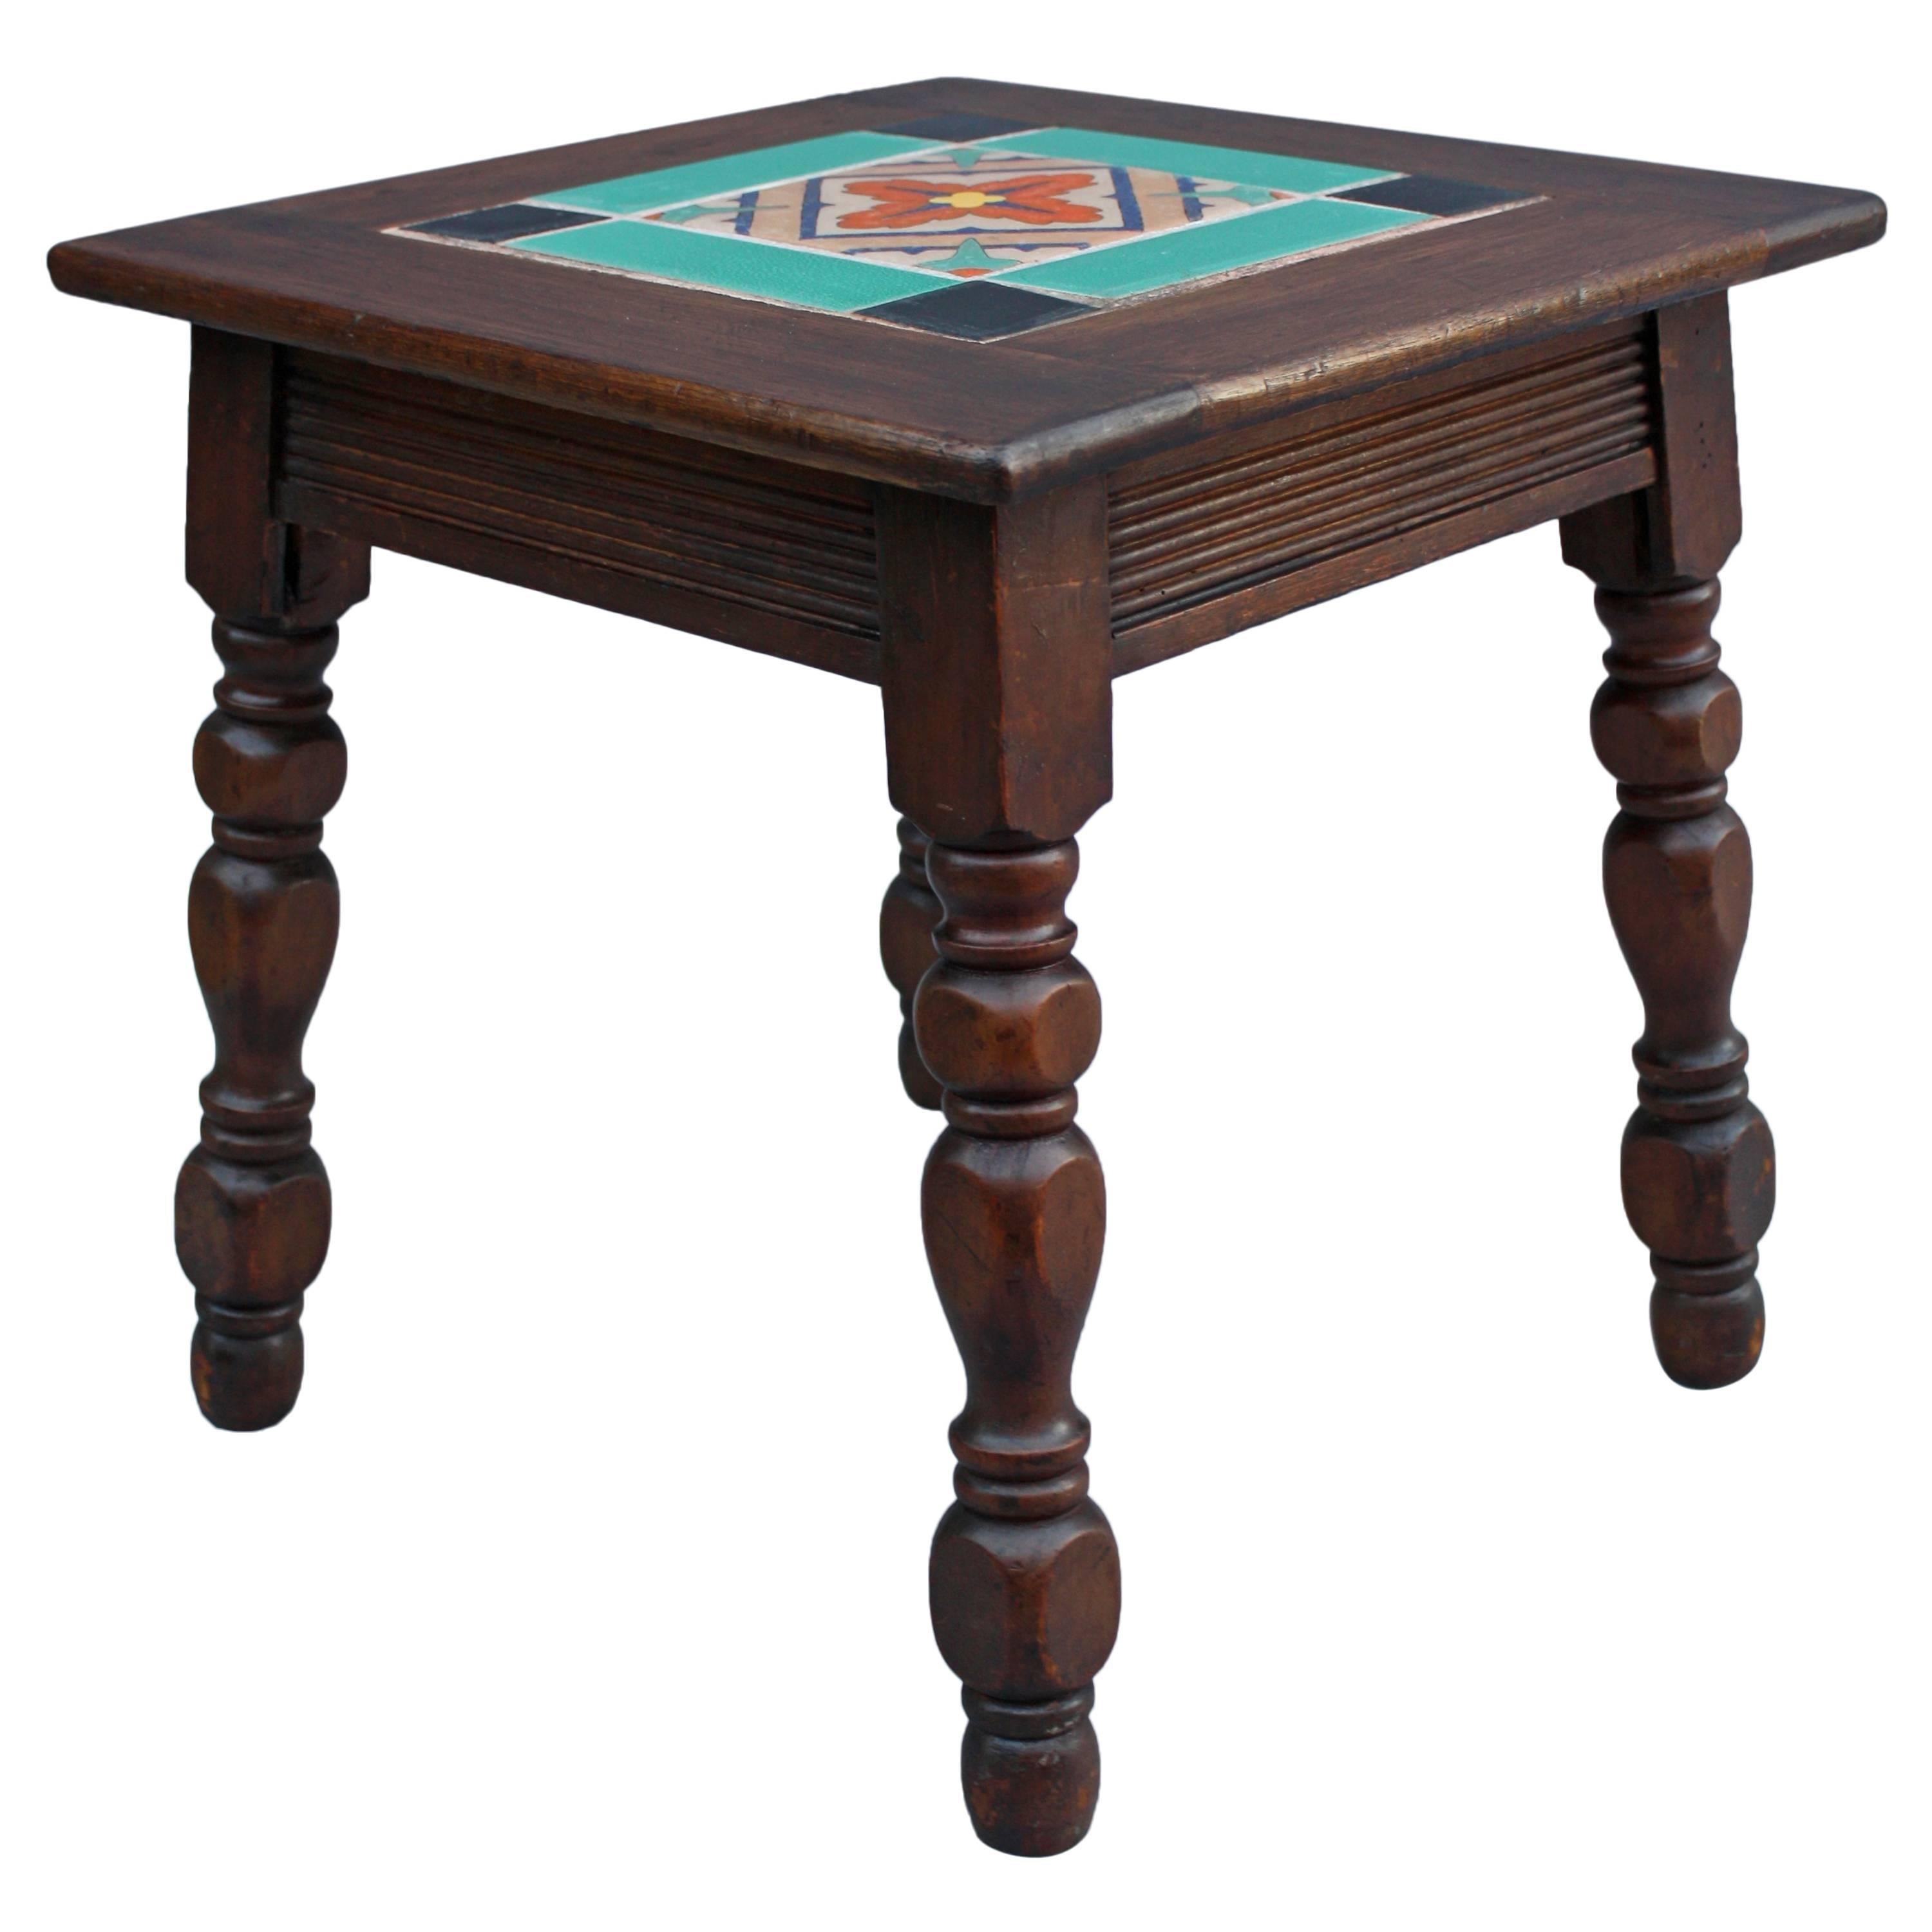 1920s Walnut Table with Inlaid California Tile